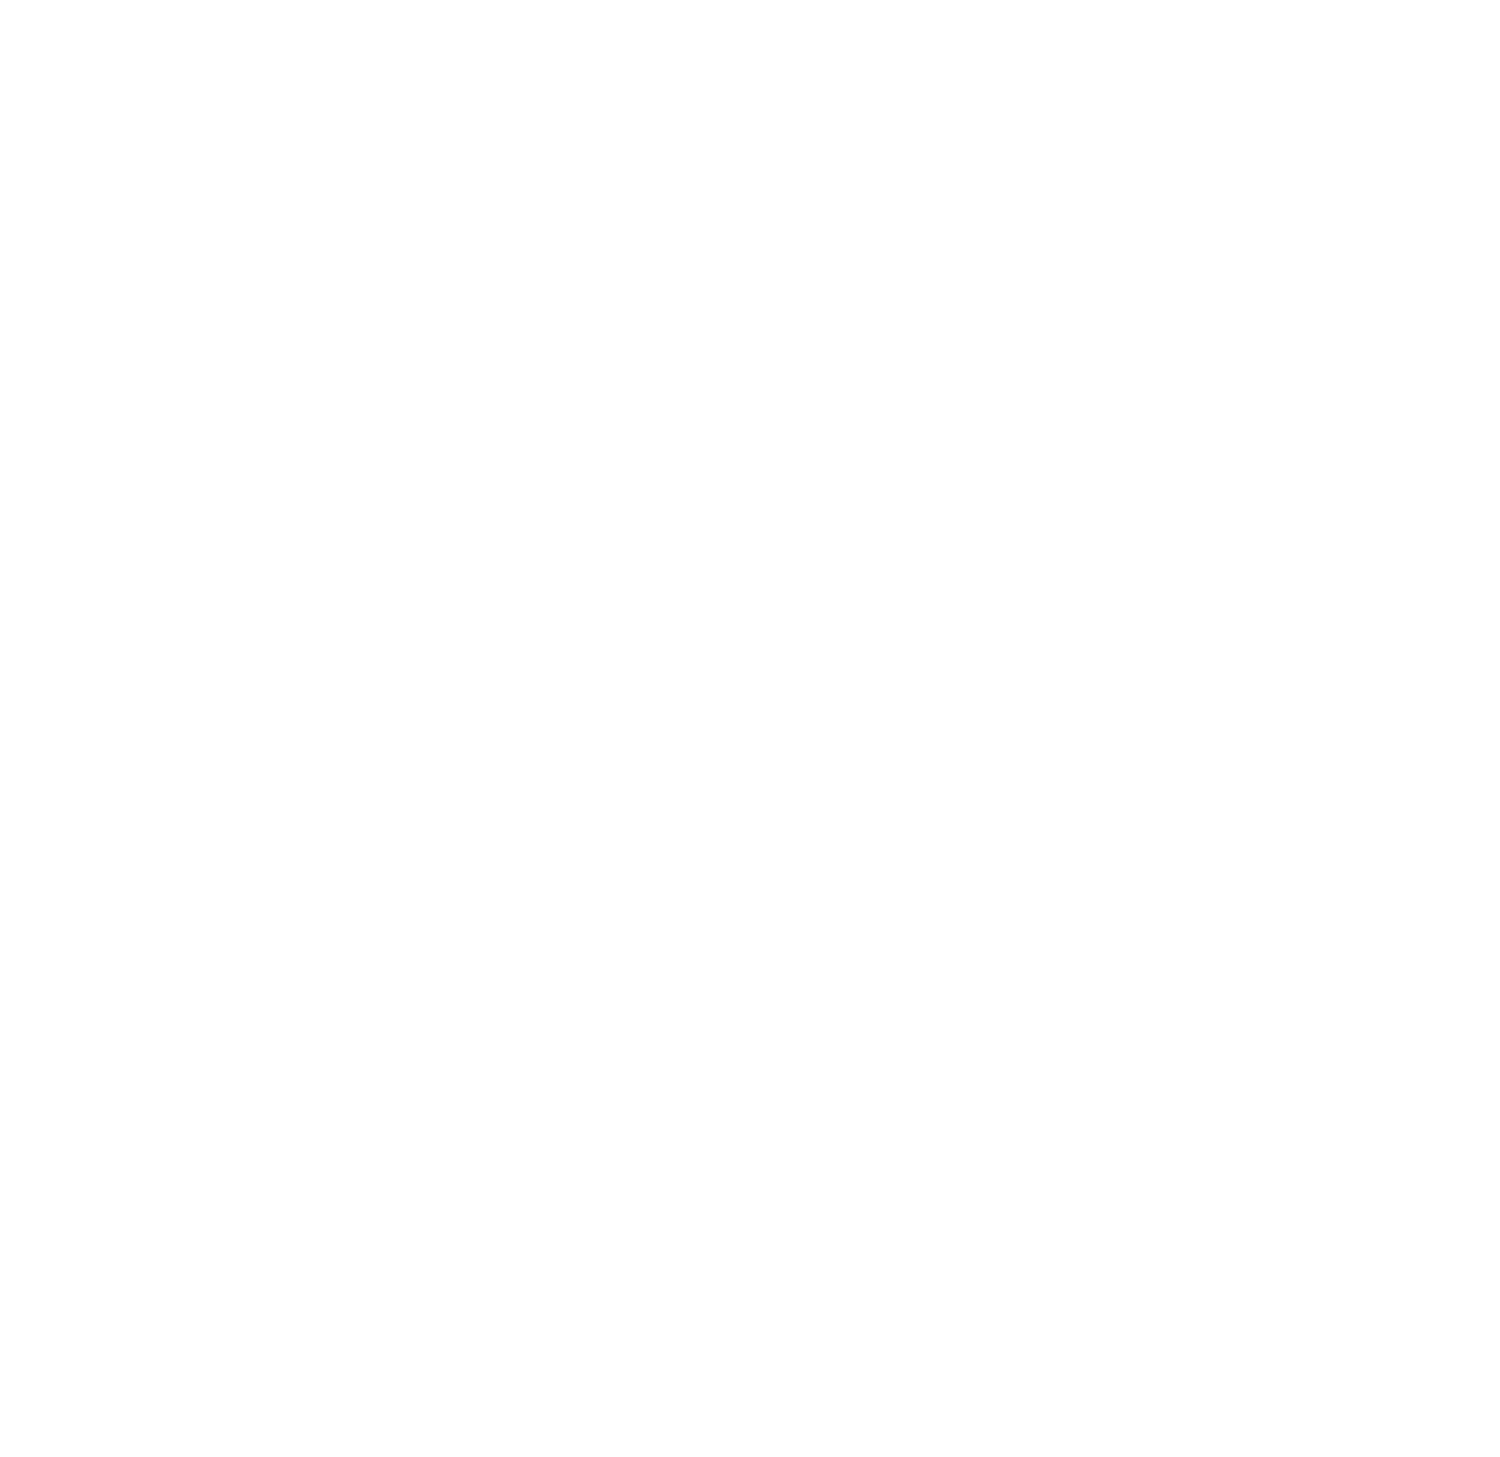 Canine Culture Podcast